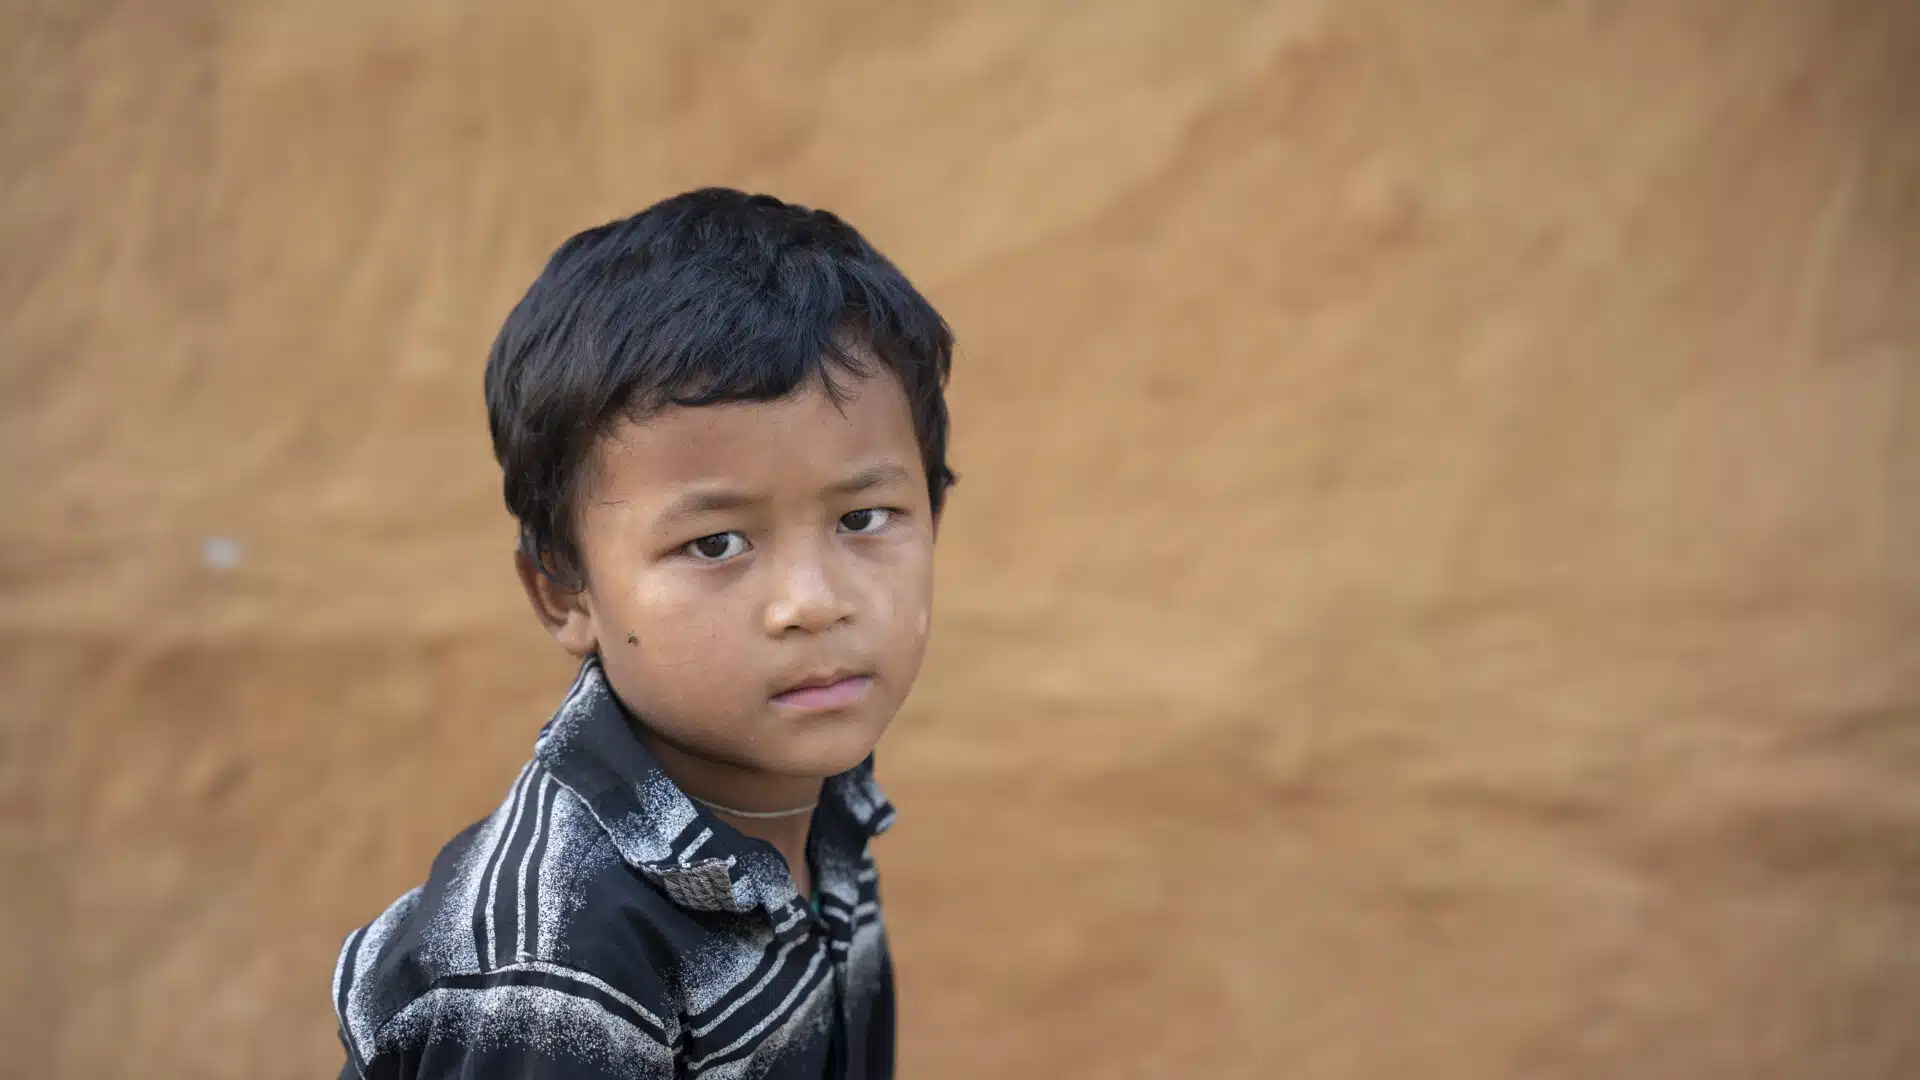 Sunil, six, from Nepal, who spent two years in an orphanage